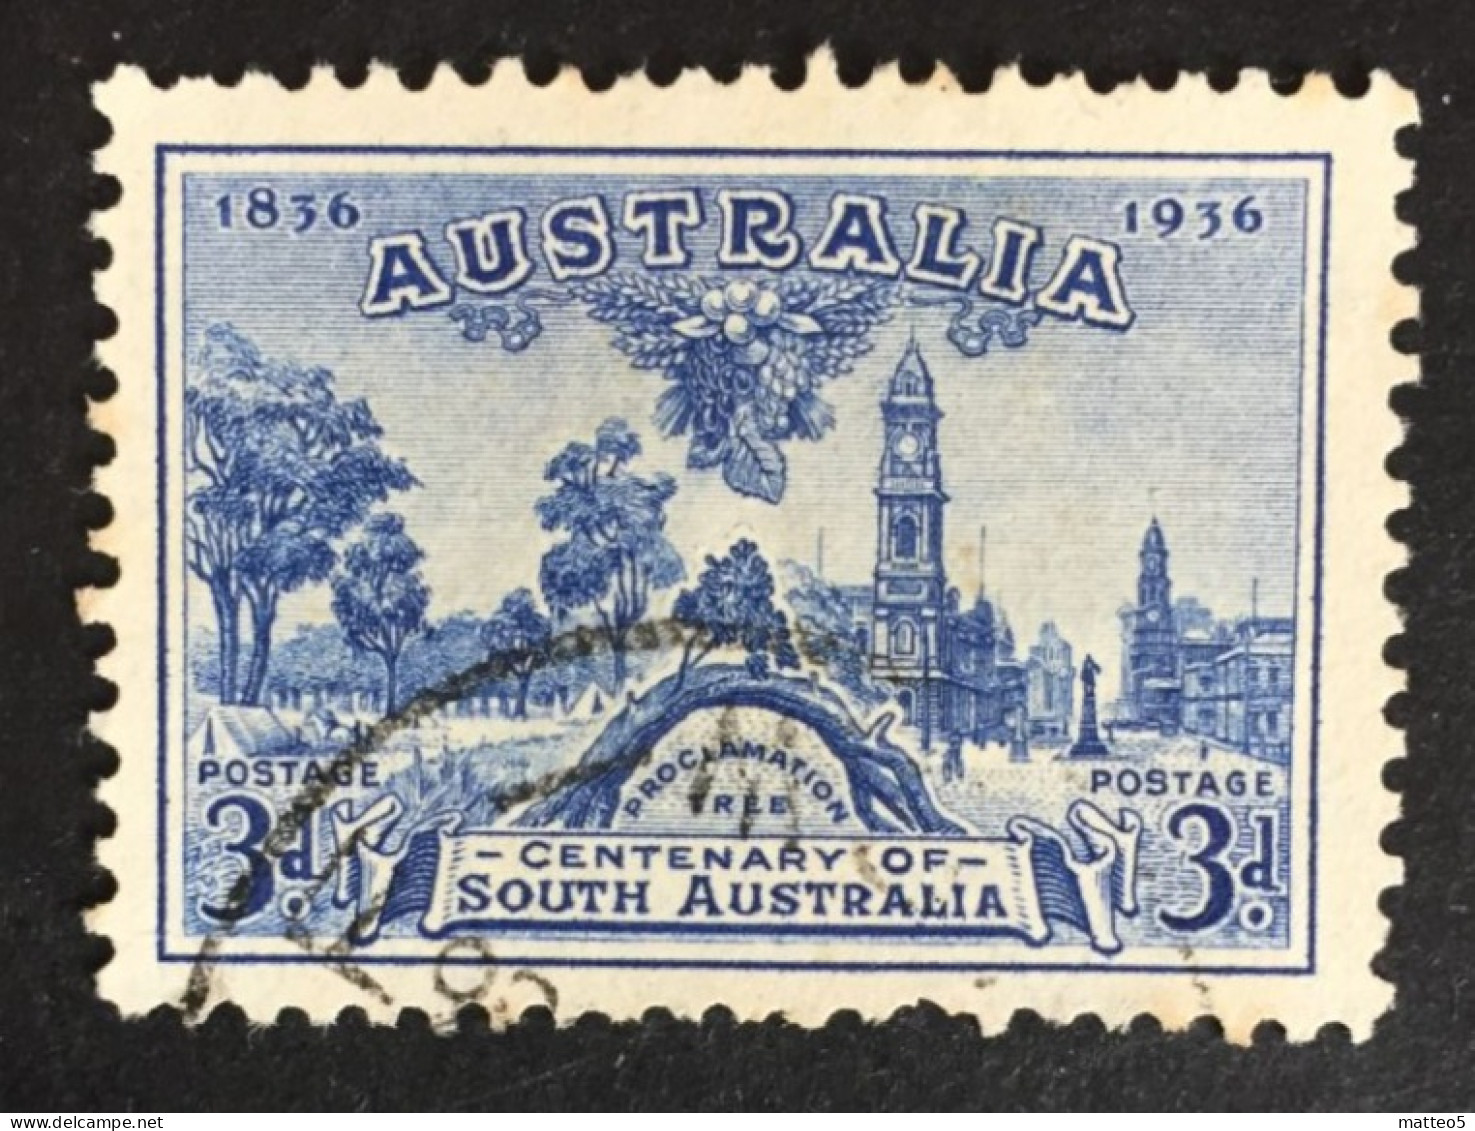 1936 Australia - Centenary Of South Australia - Proclamation Tree And Site Of Adelaide 1836 - Used - Gebraucht